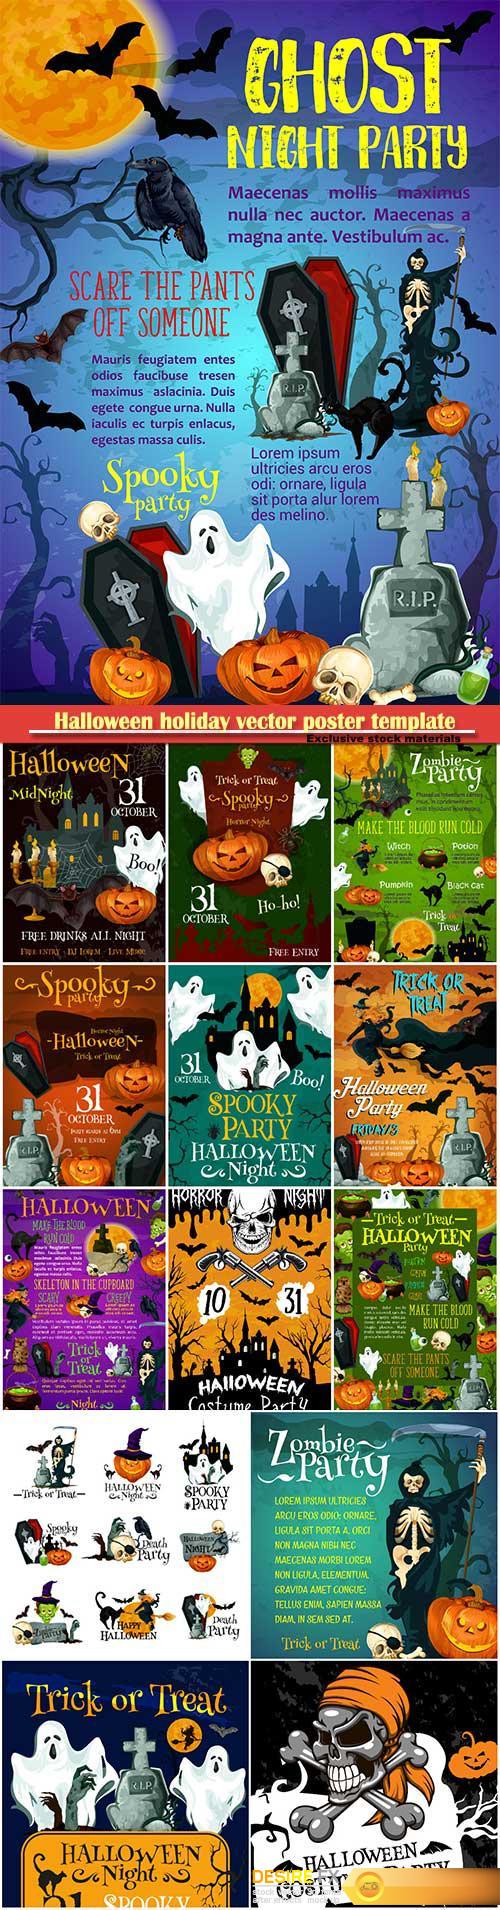 Halloween holiday vector poster template, pumpkin with witch hat, spider and skull, flying bat and ghost, creepy skeleton with scythe, cemetery and zombie